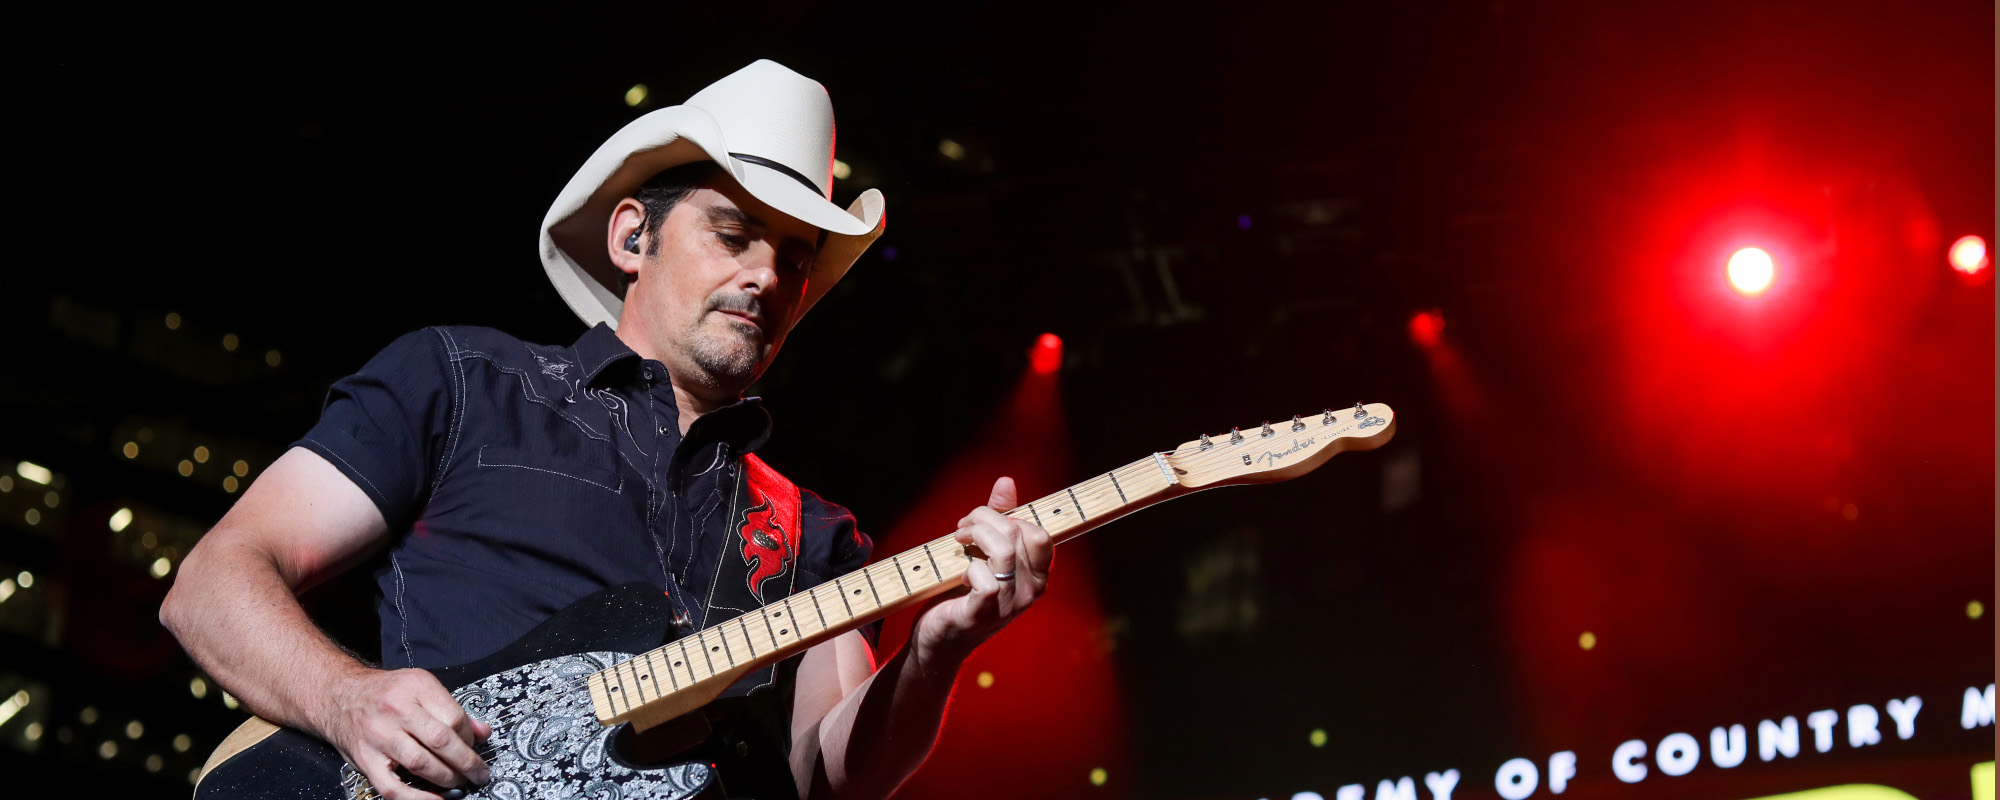 Brad Paisley Features Phone Call with Ukraine President Volodymyr Zelenskyy on New Song “Same Here”